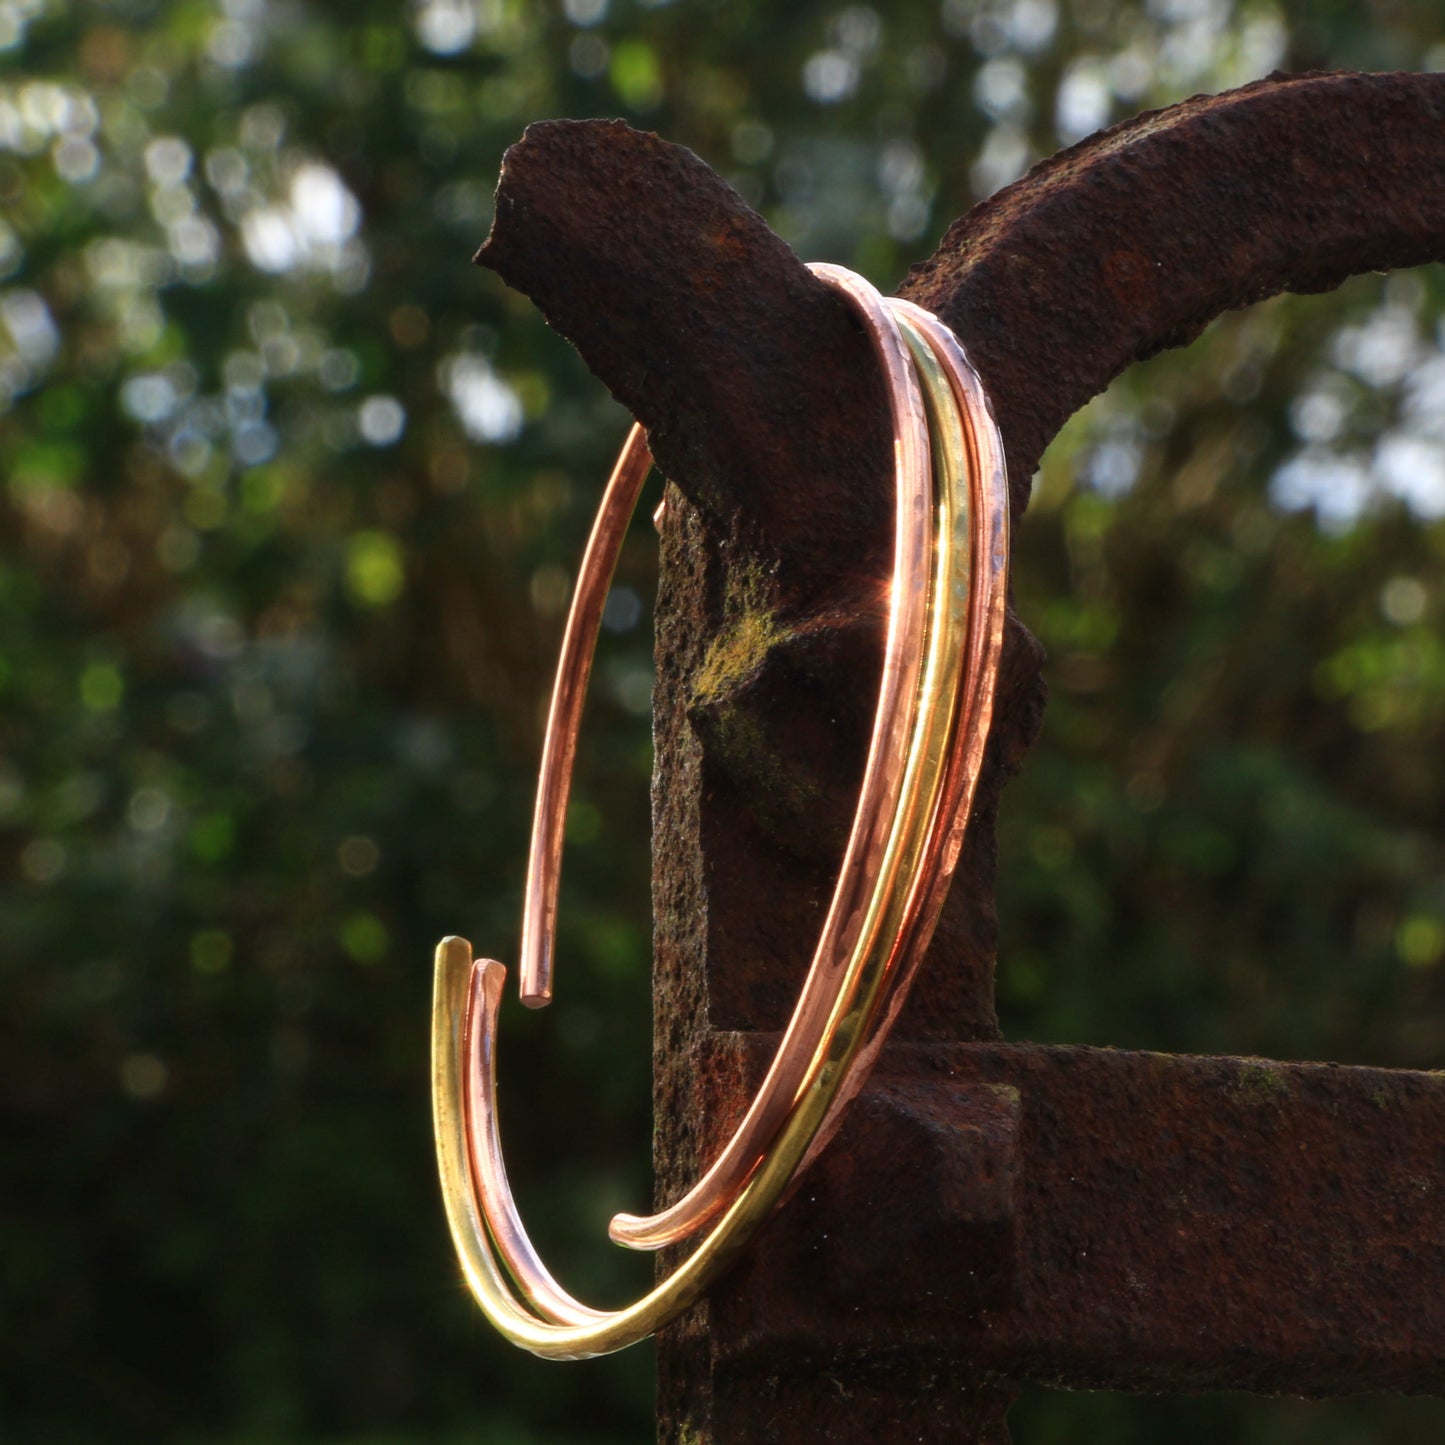 Thin copper and brass bangles. Adjustable handmade copper and brass bracelets.